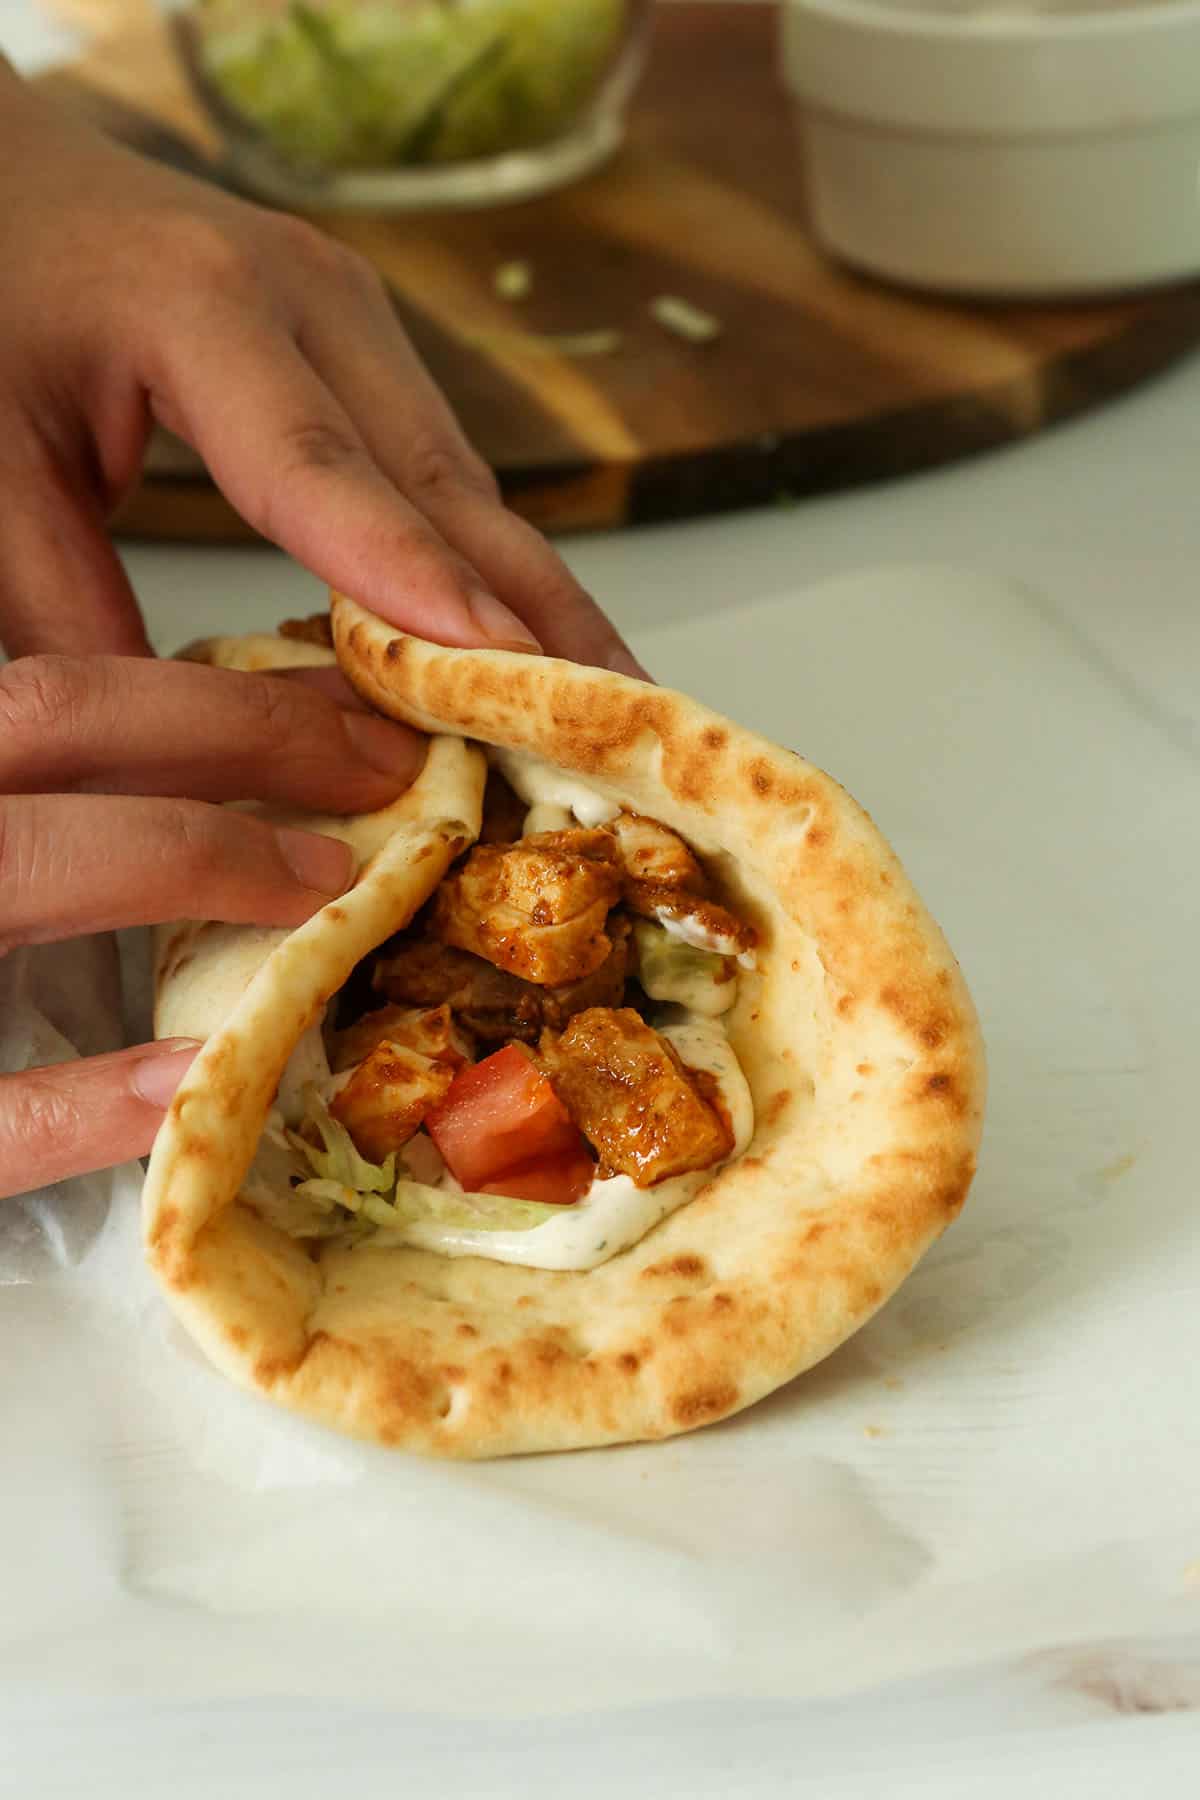 Overlapping the pita bread to enclose the shawarma filling.